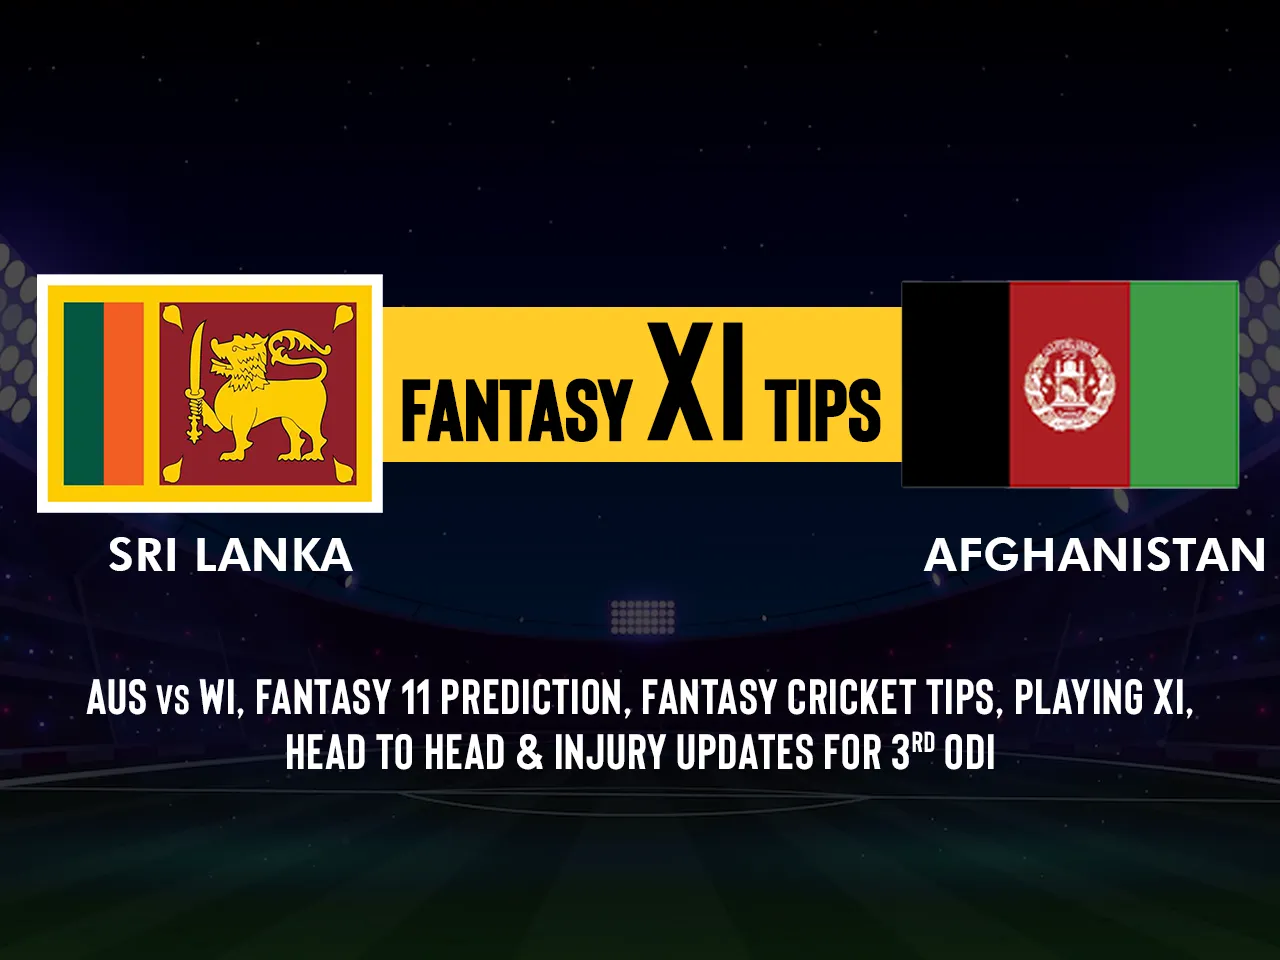 SL vs AFG Dream11 Prediction, Playing XI Head-to-Head Stats, and Pitch Report for 3rd ODI